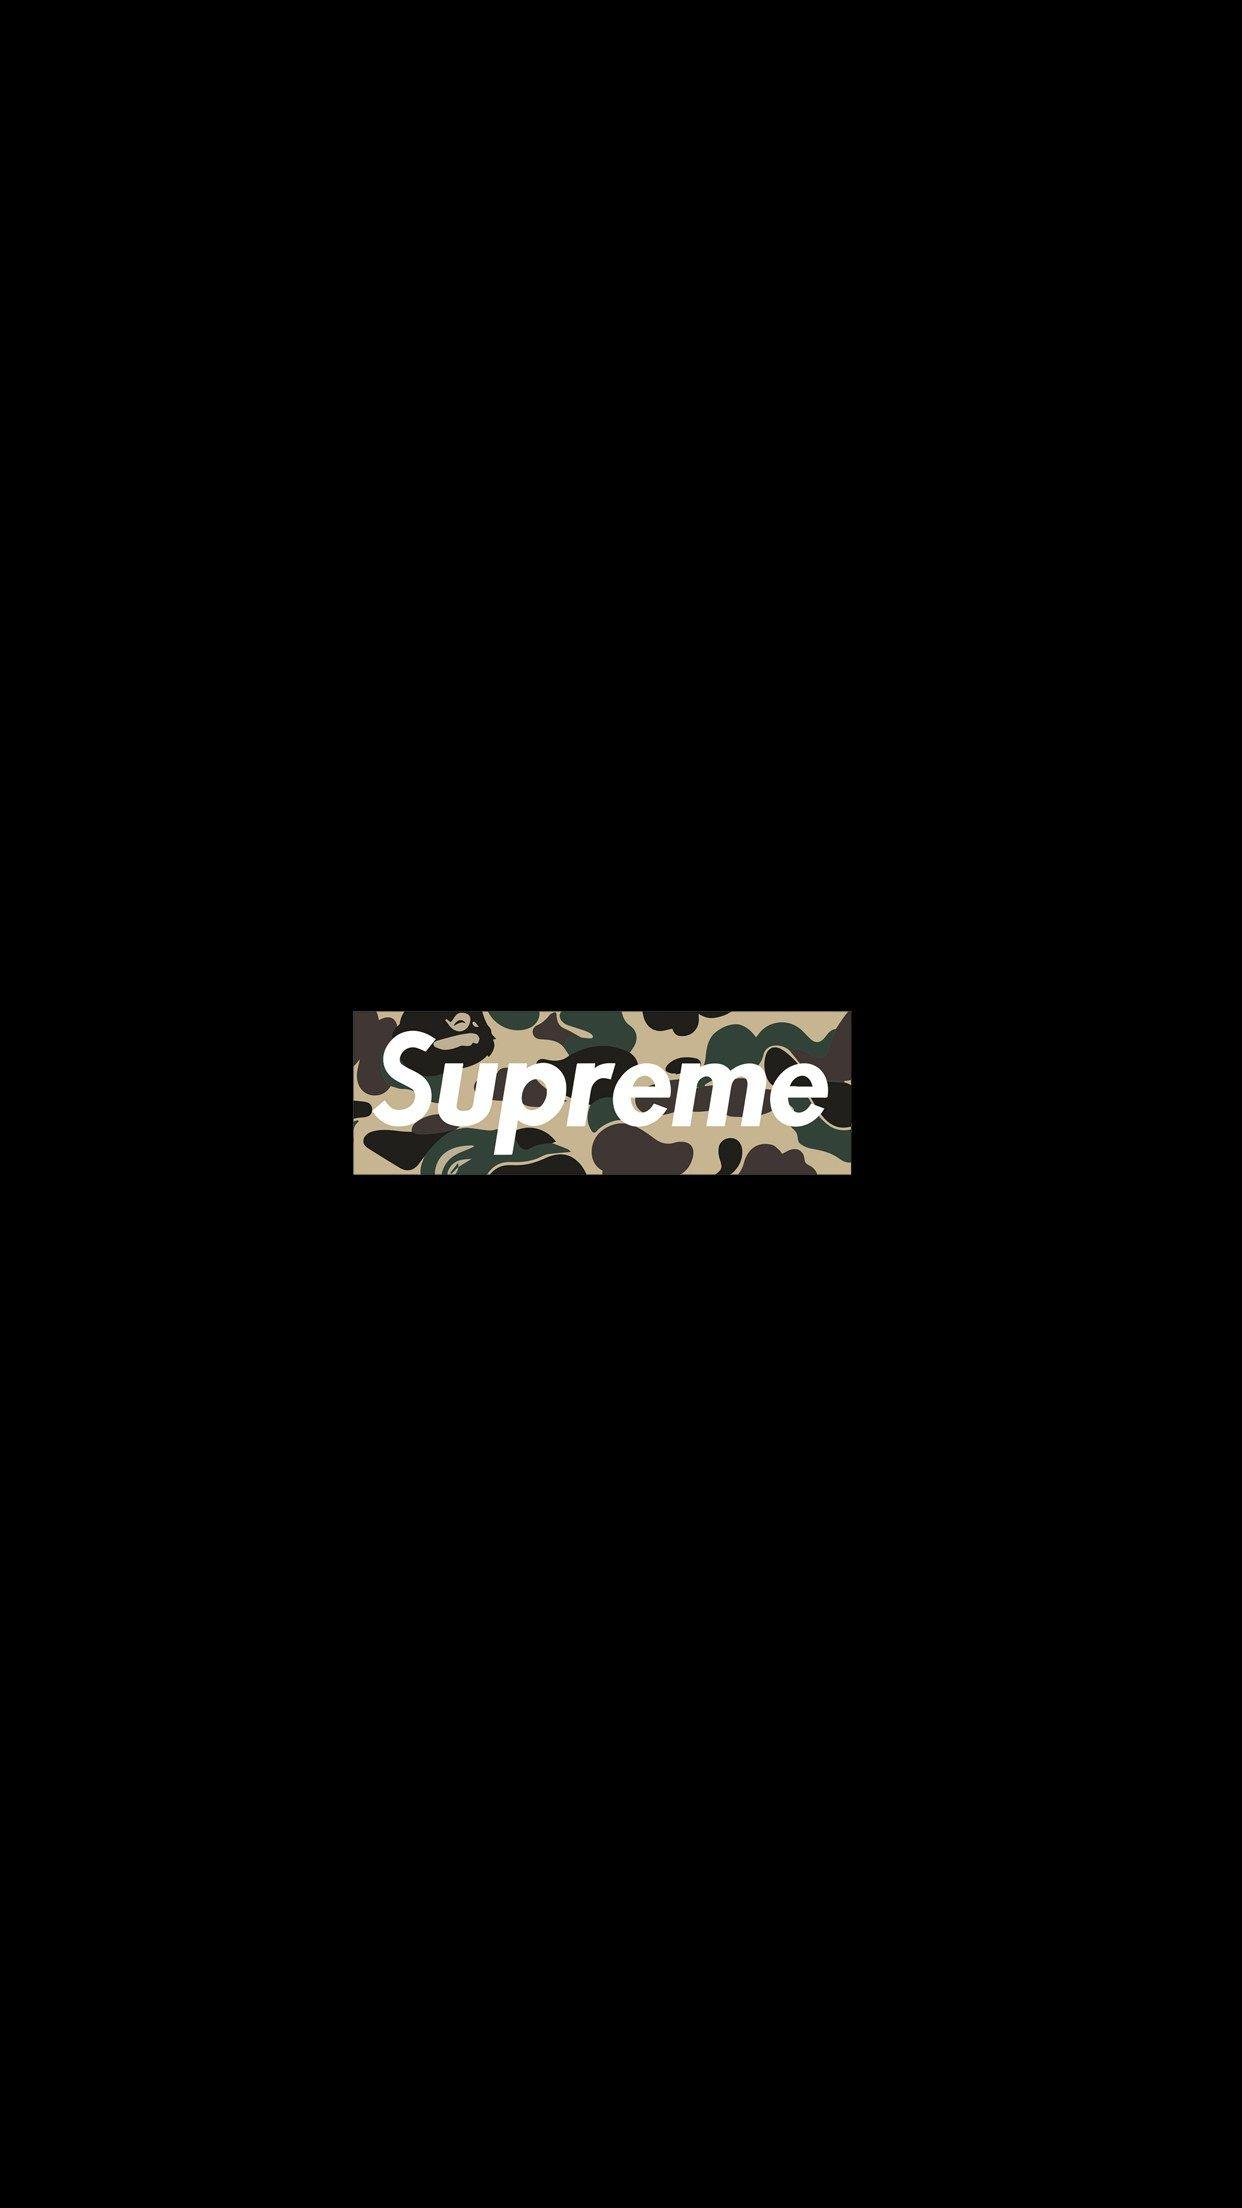 Some Supreme Wallpaper For iPhone Imgur within iPhone Wallpaper